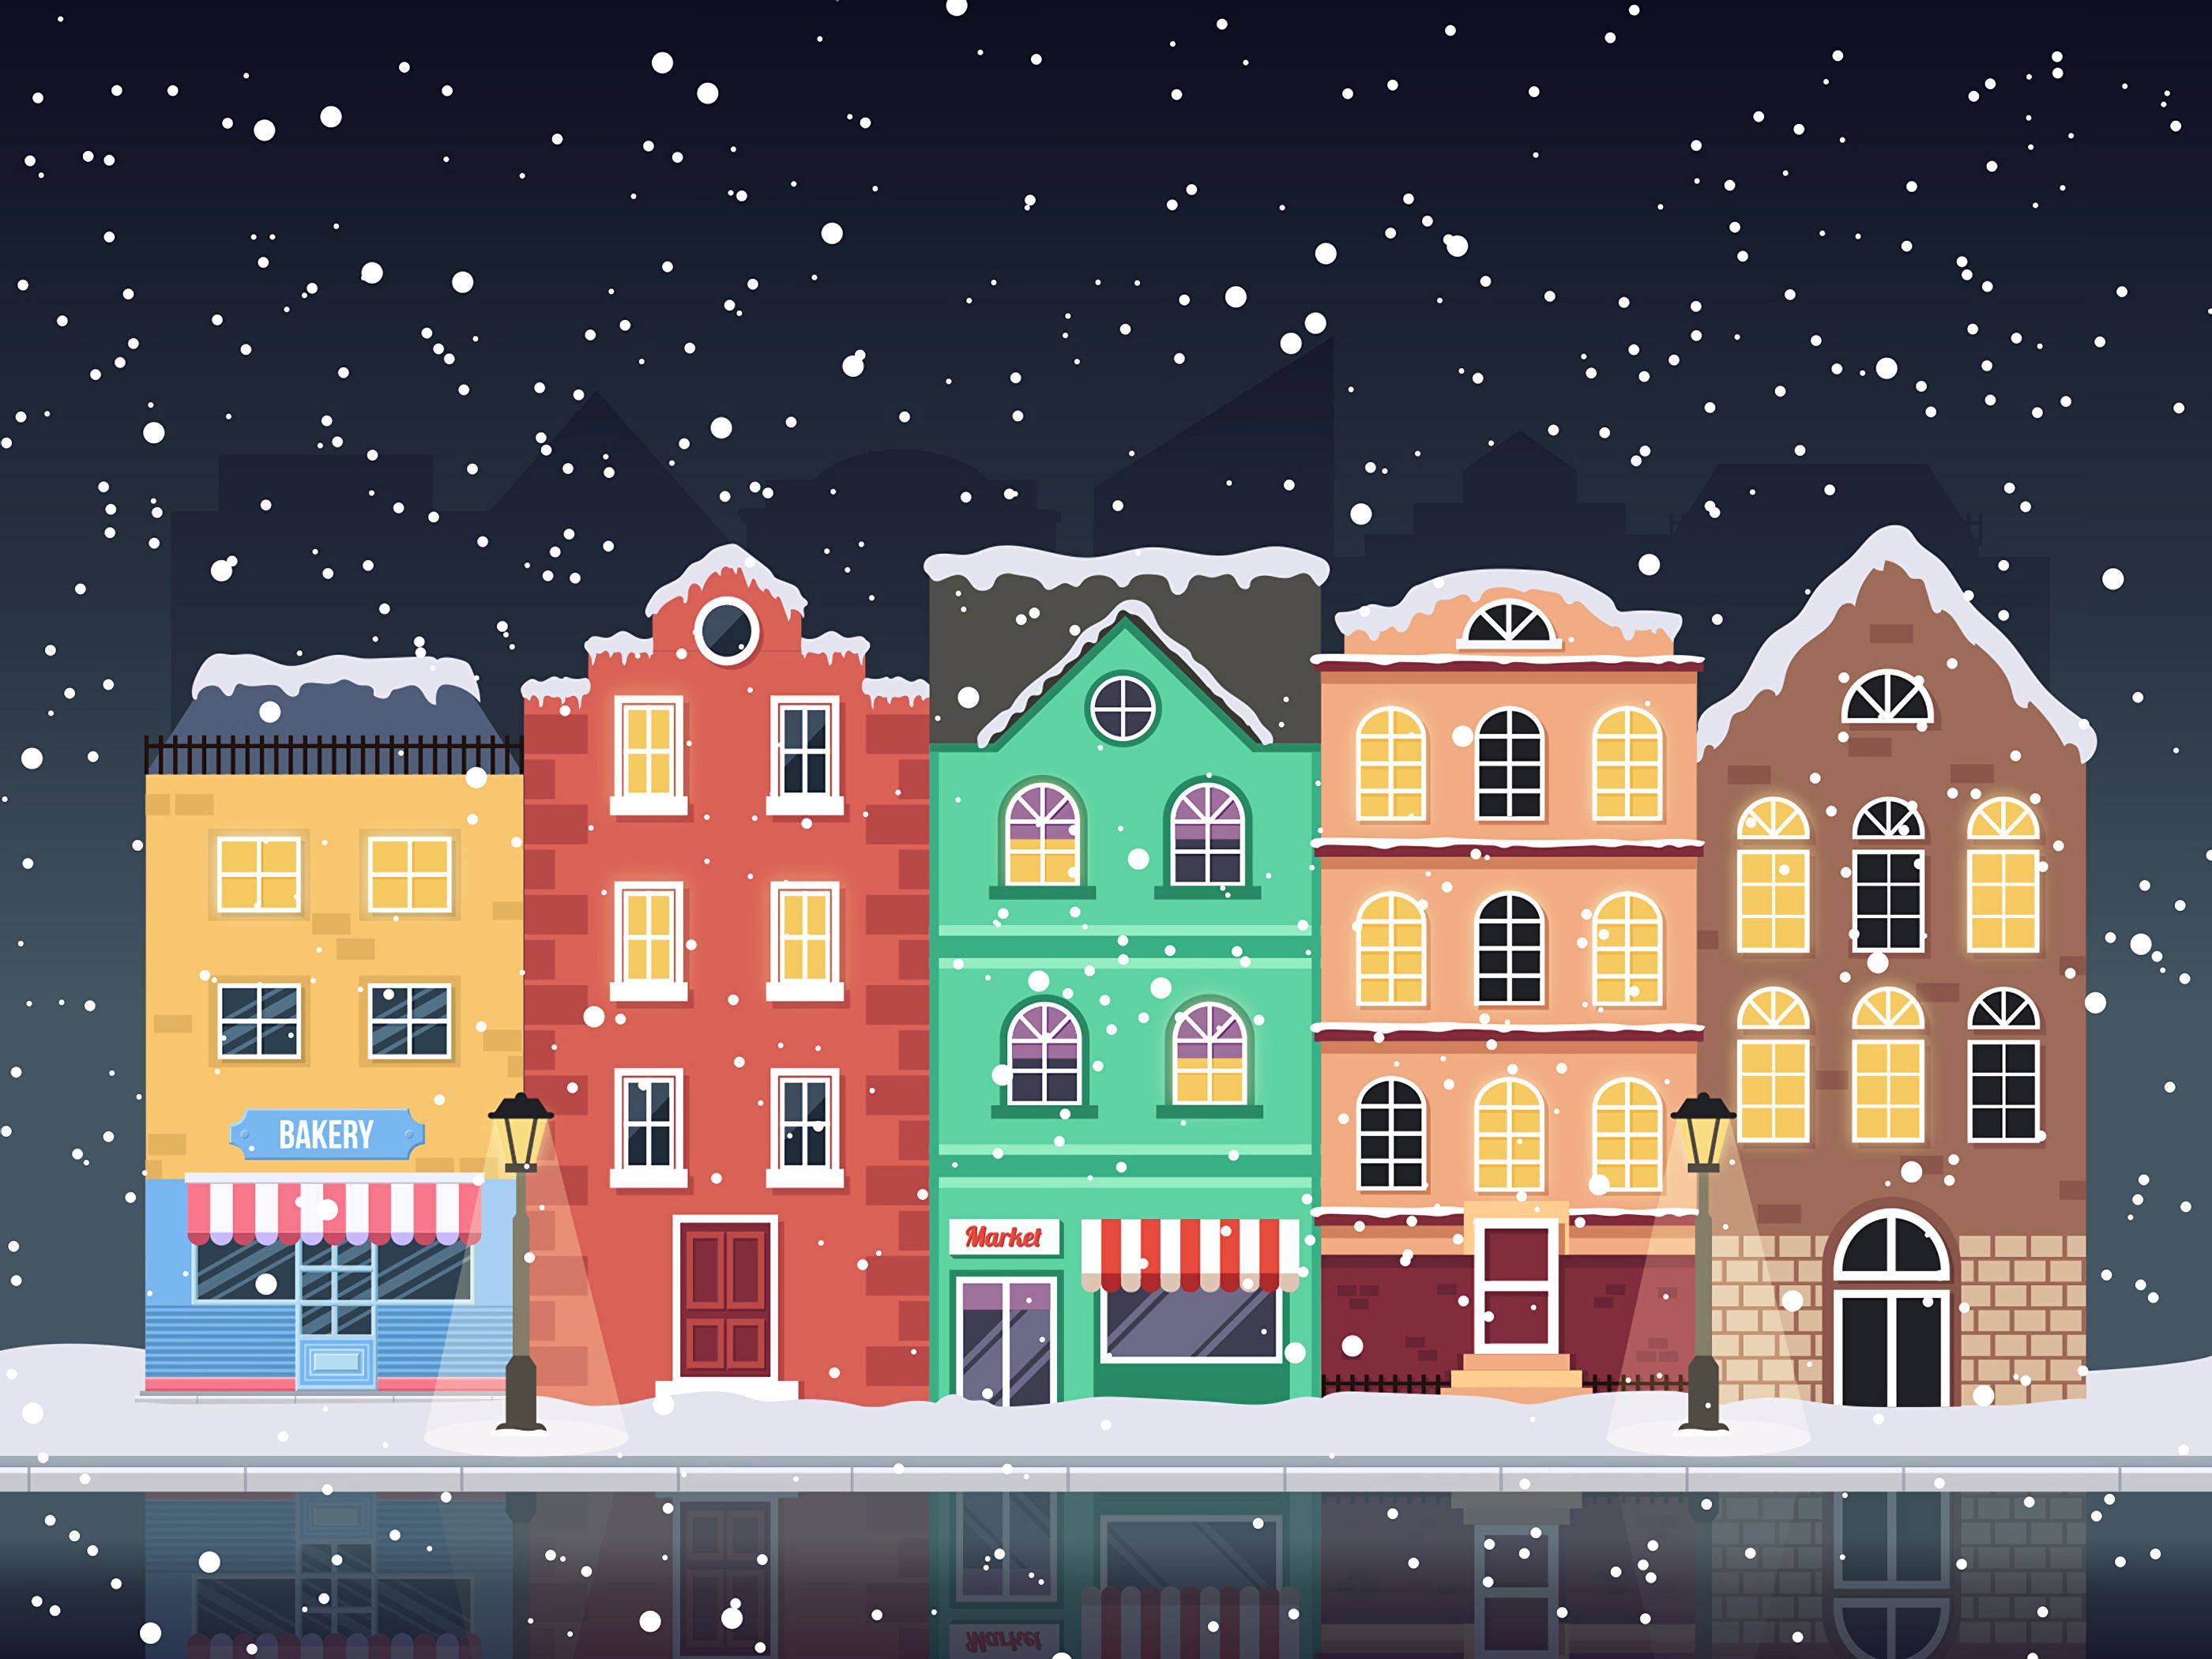 157921 download wallpaper winter, houses, art, snowfall screensavers and pictures for free